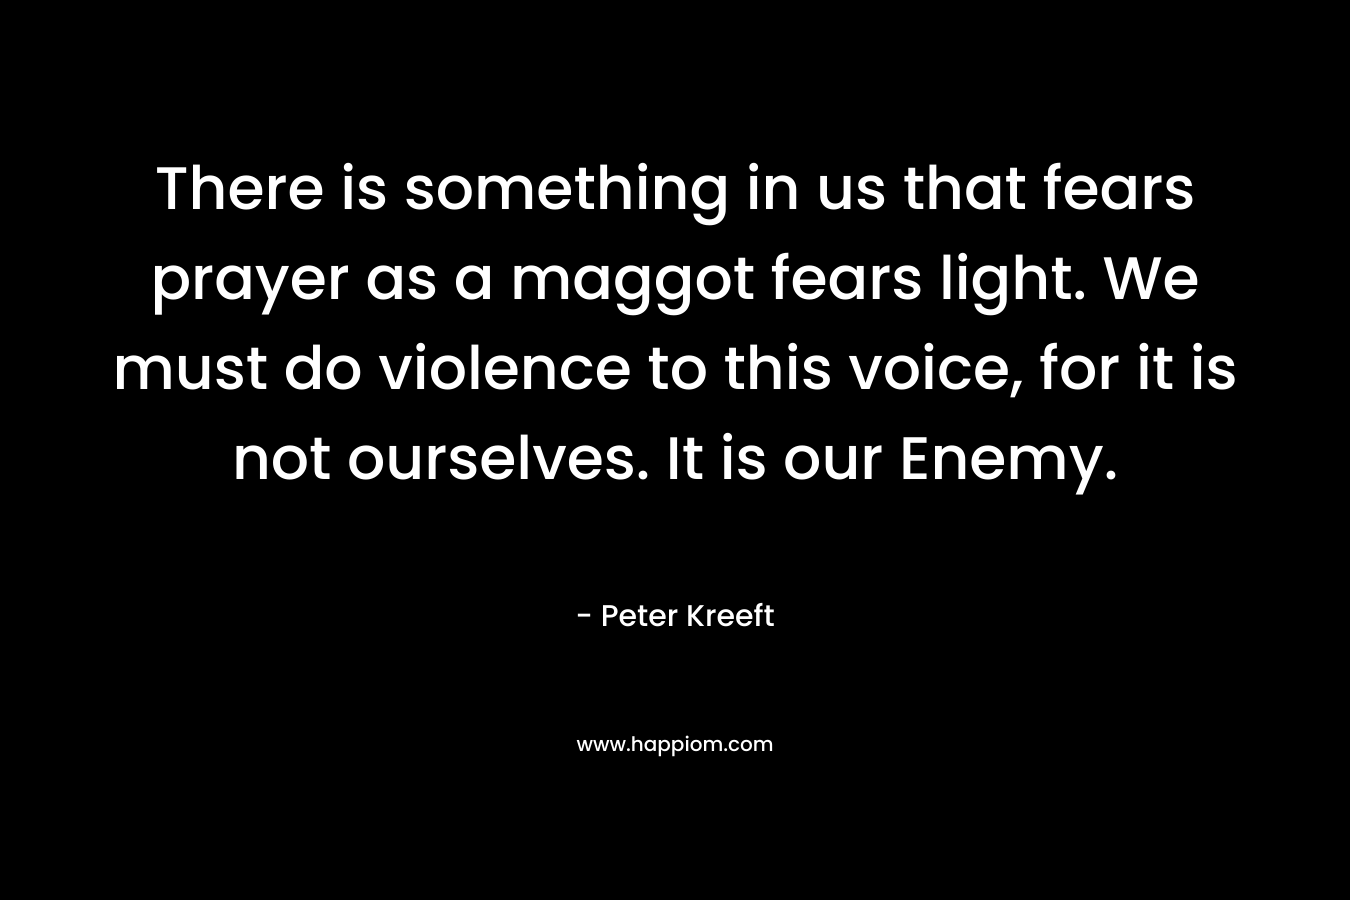 There is something in us that fears prayer as a maggot fears light. We must do violence to this voice, for it is not ourselves. It is our Enemy.